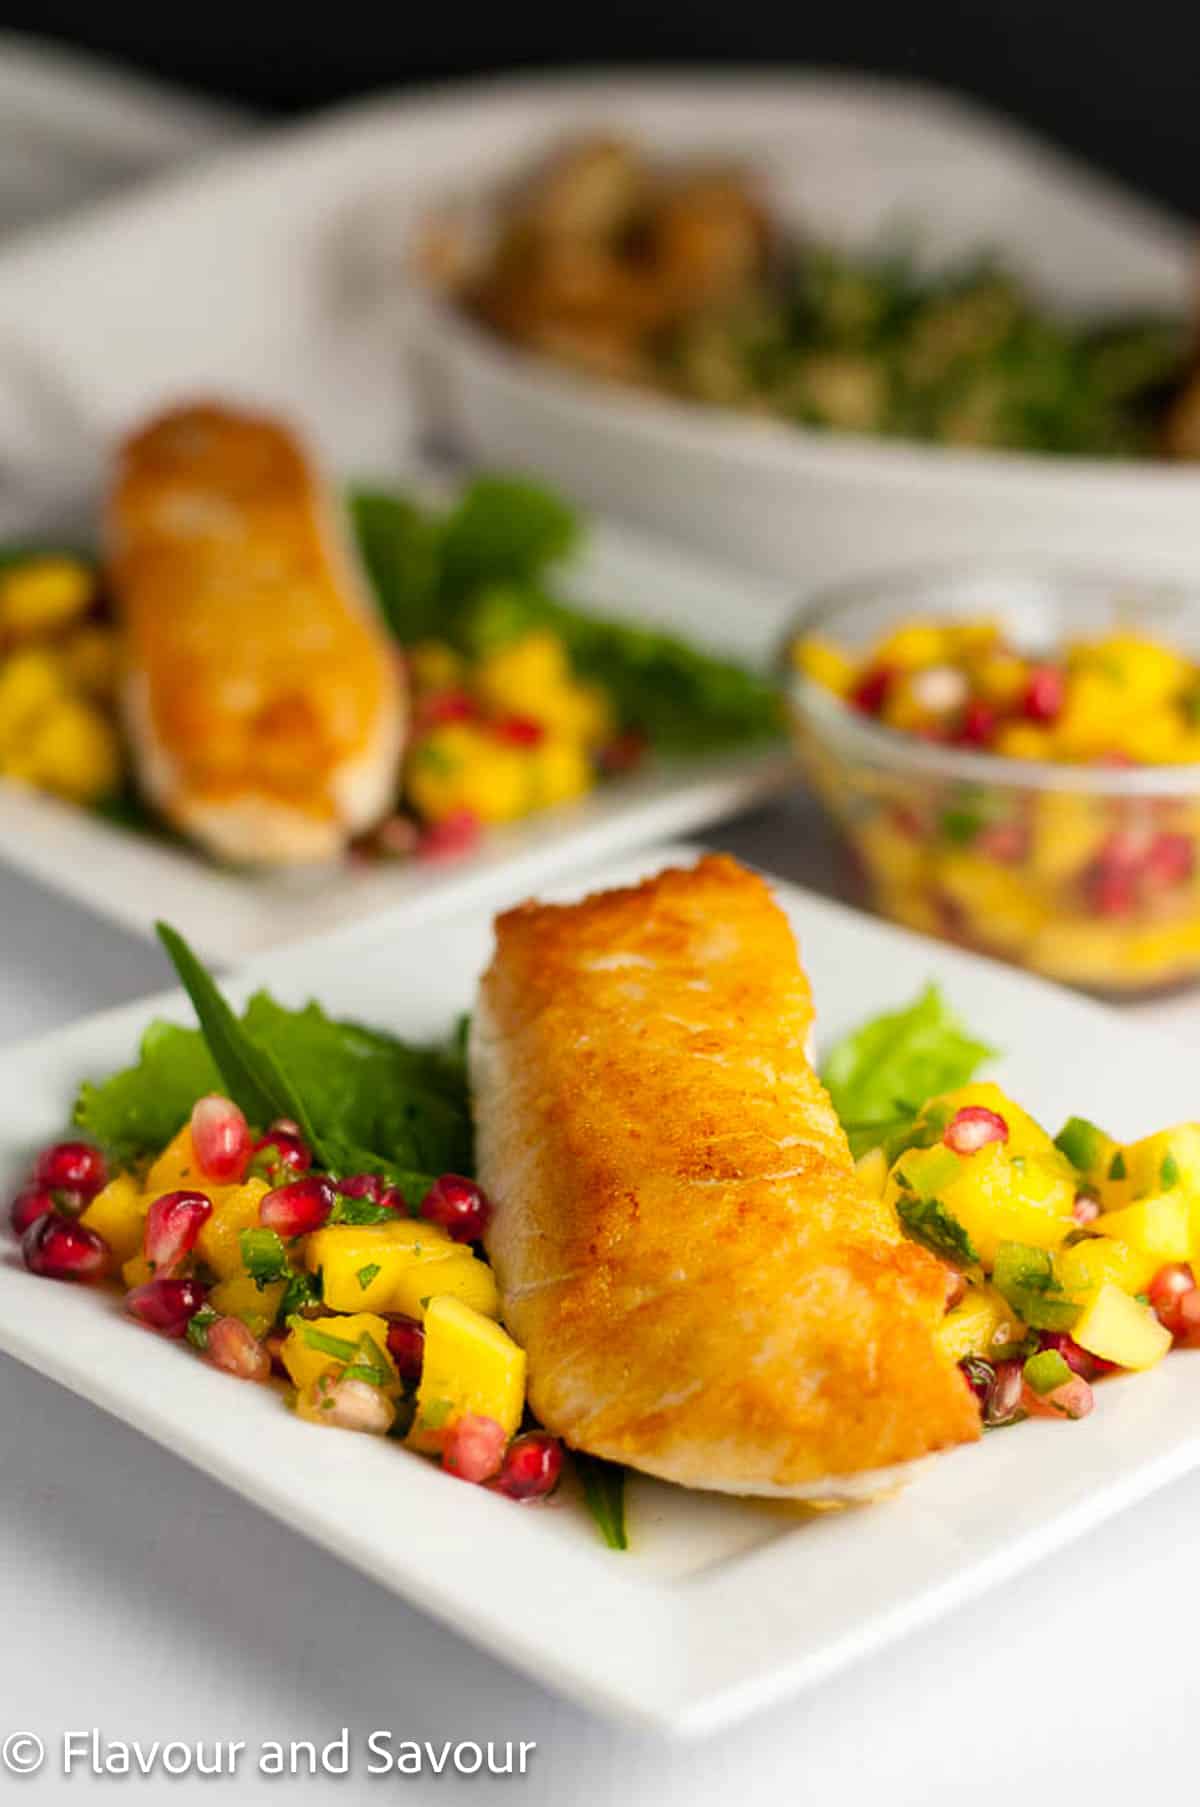 Two plates with salt and pepper crusted halibut fillets served with mango-pomegranate salsa in a small bowl beside.